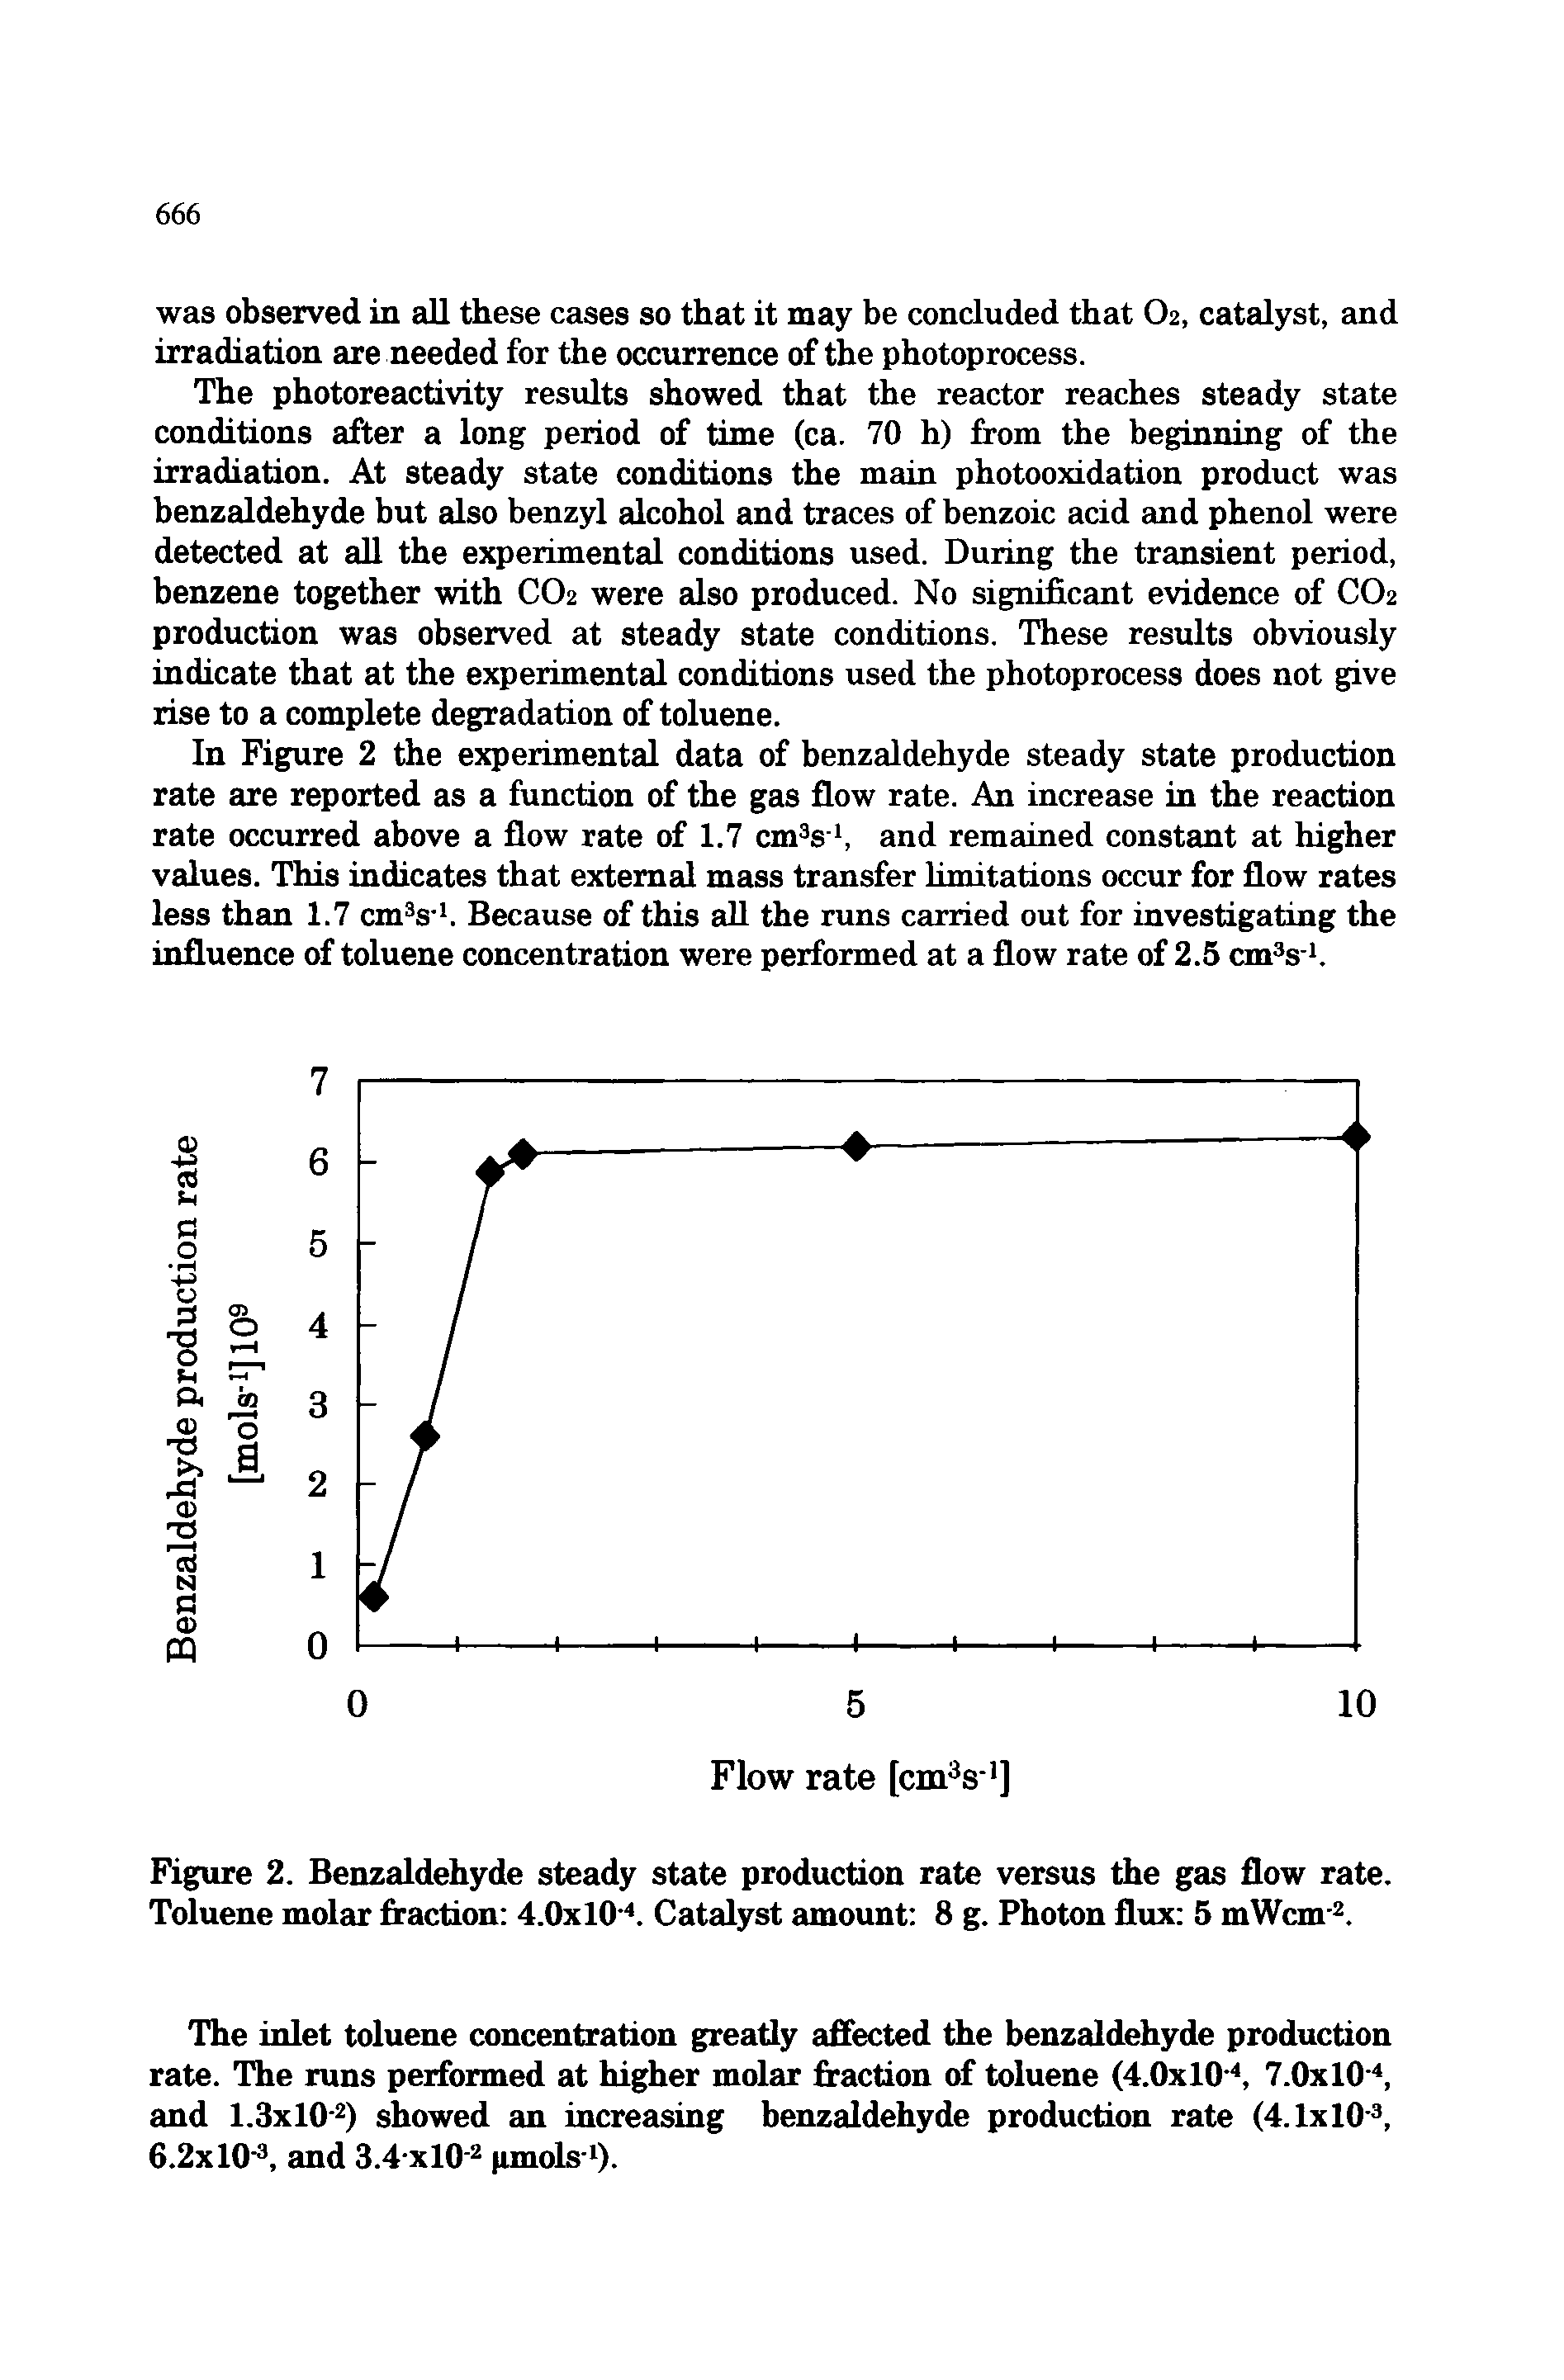 Figure 2. Benzaldehyde steady state production rate versus the gas flow rate. Toluene molar firaction 4.0x10". Catalyst amount 8 g. Photon flux 5 mWcm-. ...